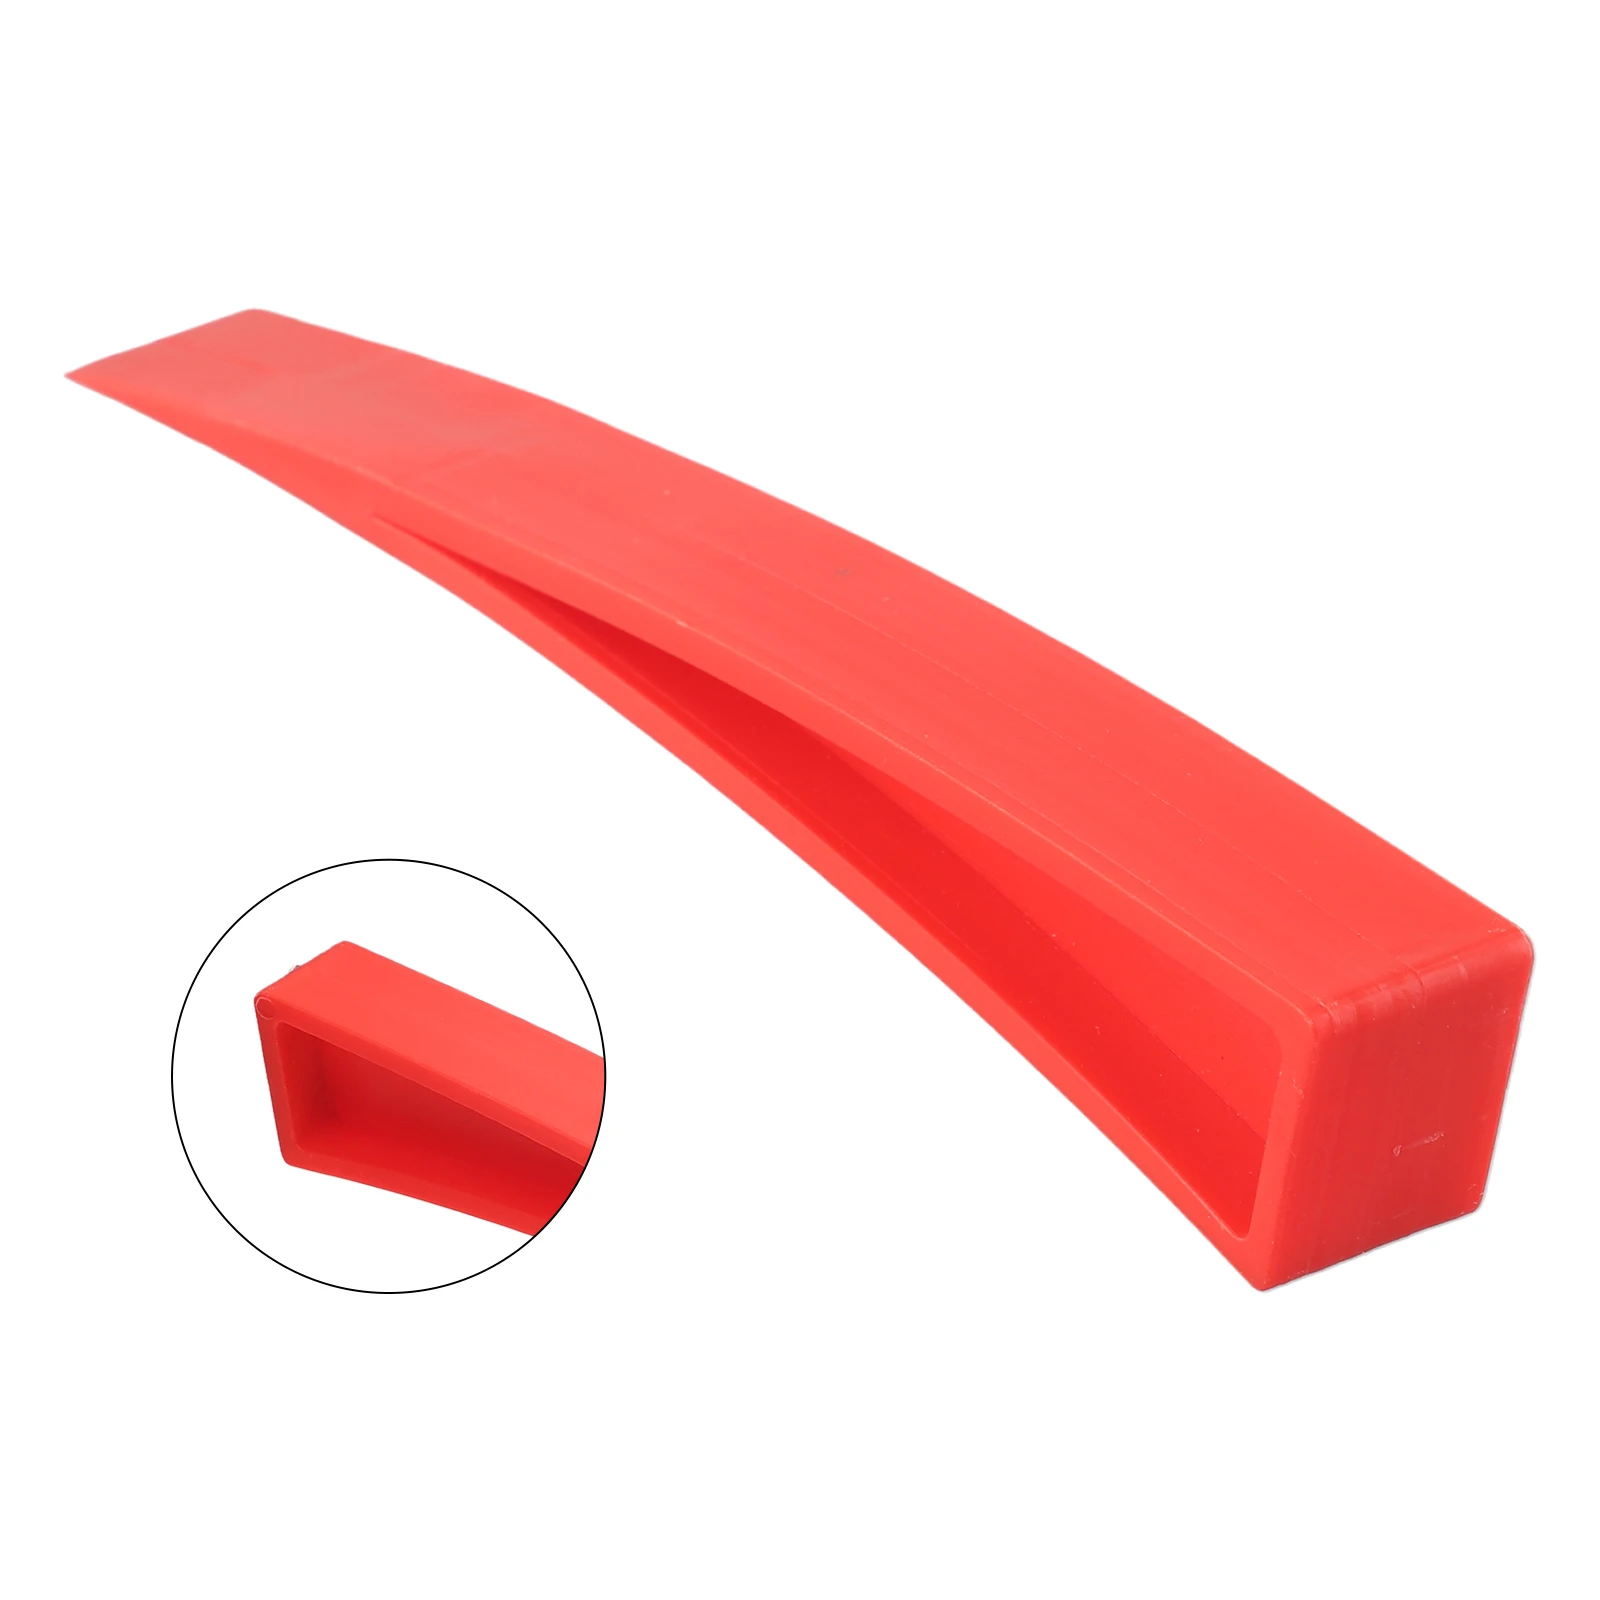 Red Auto/Car Door For Window Wedge Panel Paintless Dent Removal Repair Hand Tool Plastic-Accessories For Vehicles locksmith tools klom pump wedge auto air wedge airbag lock pick set open car door lock hand tools kit for car repair